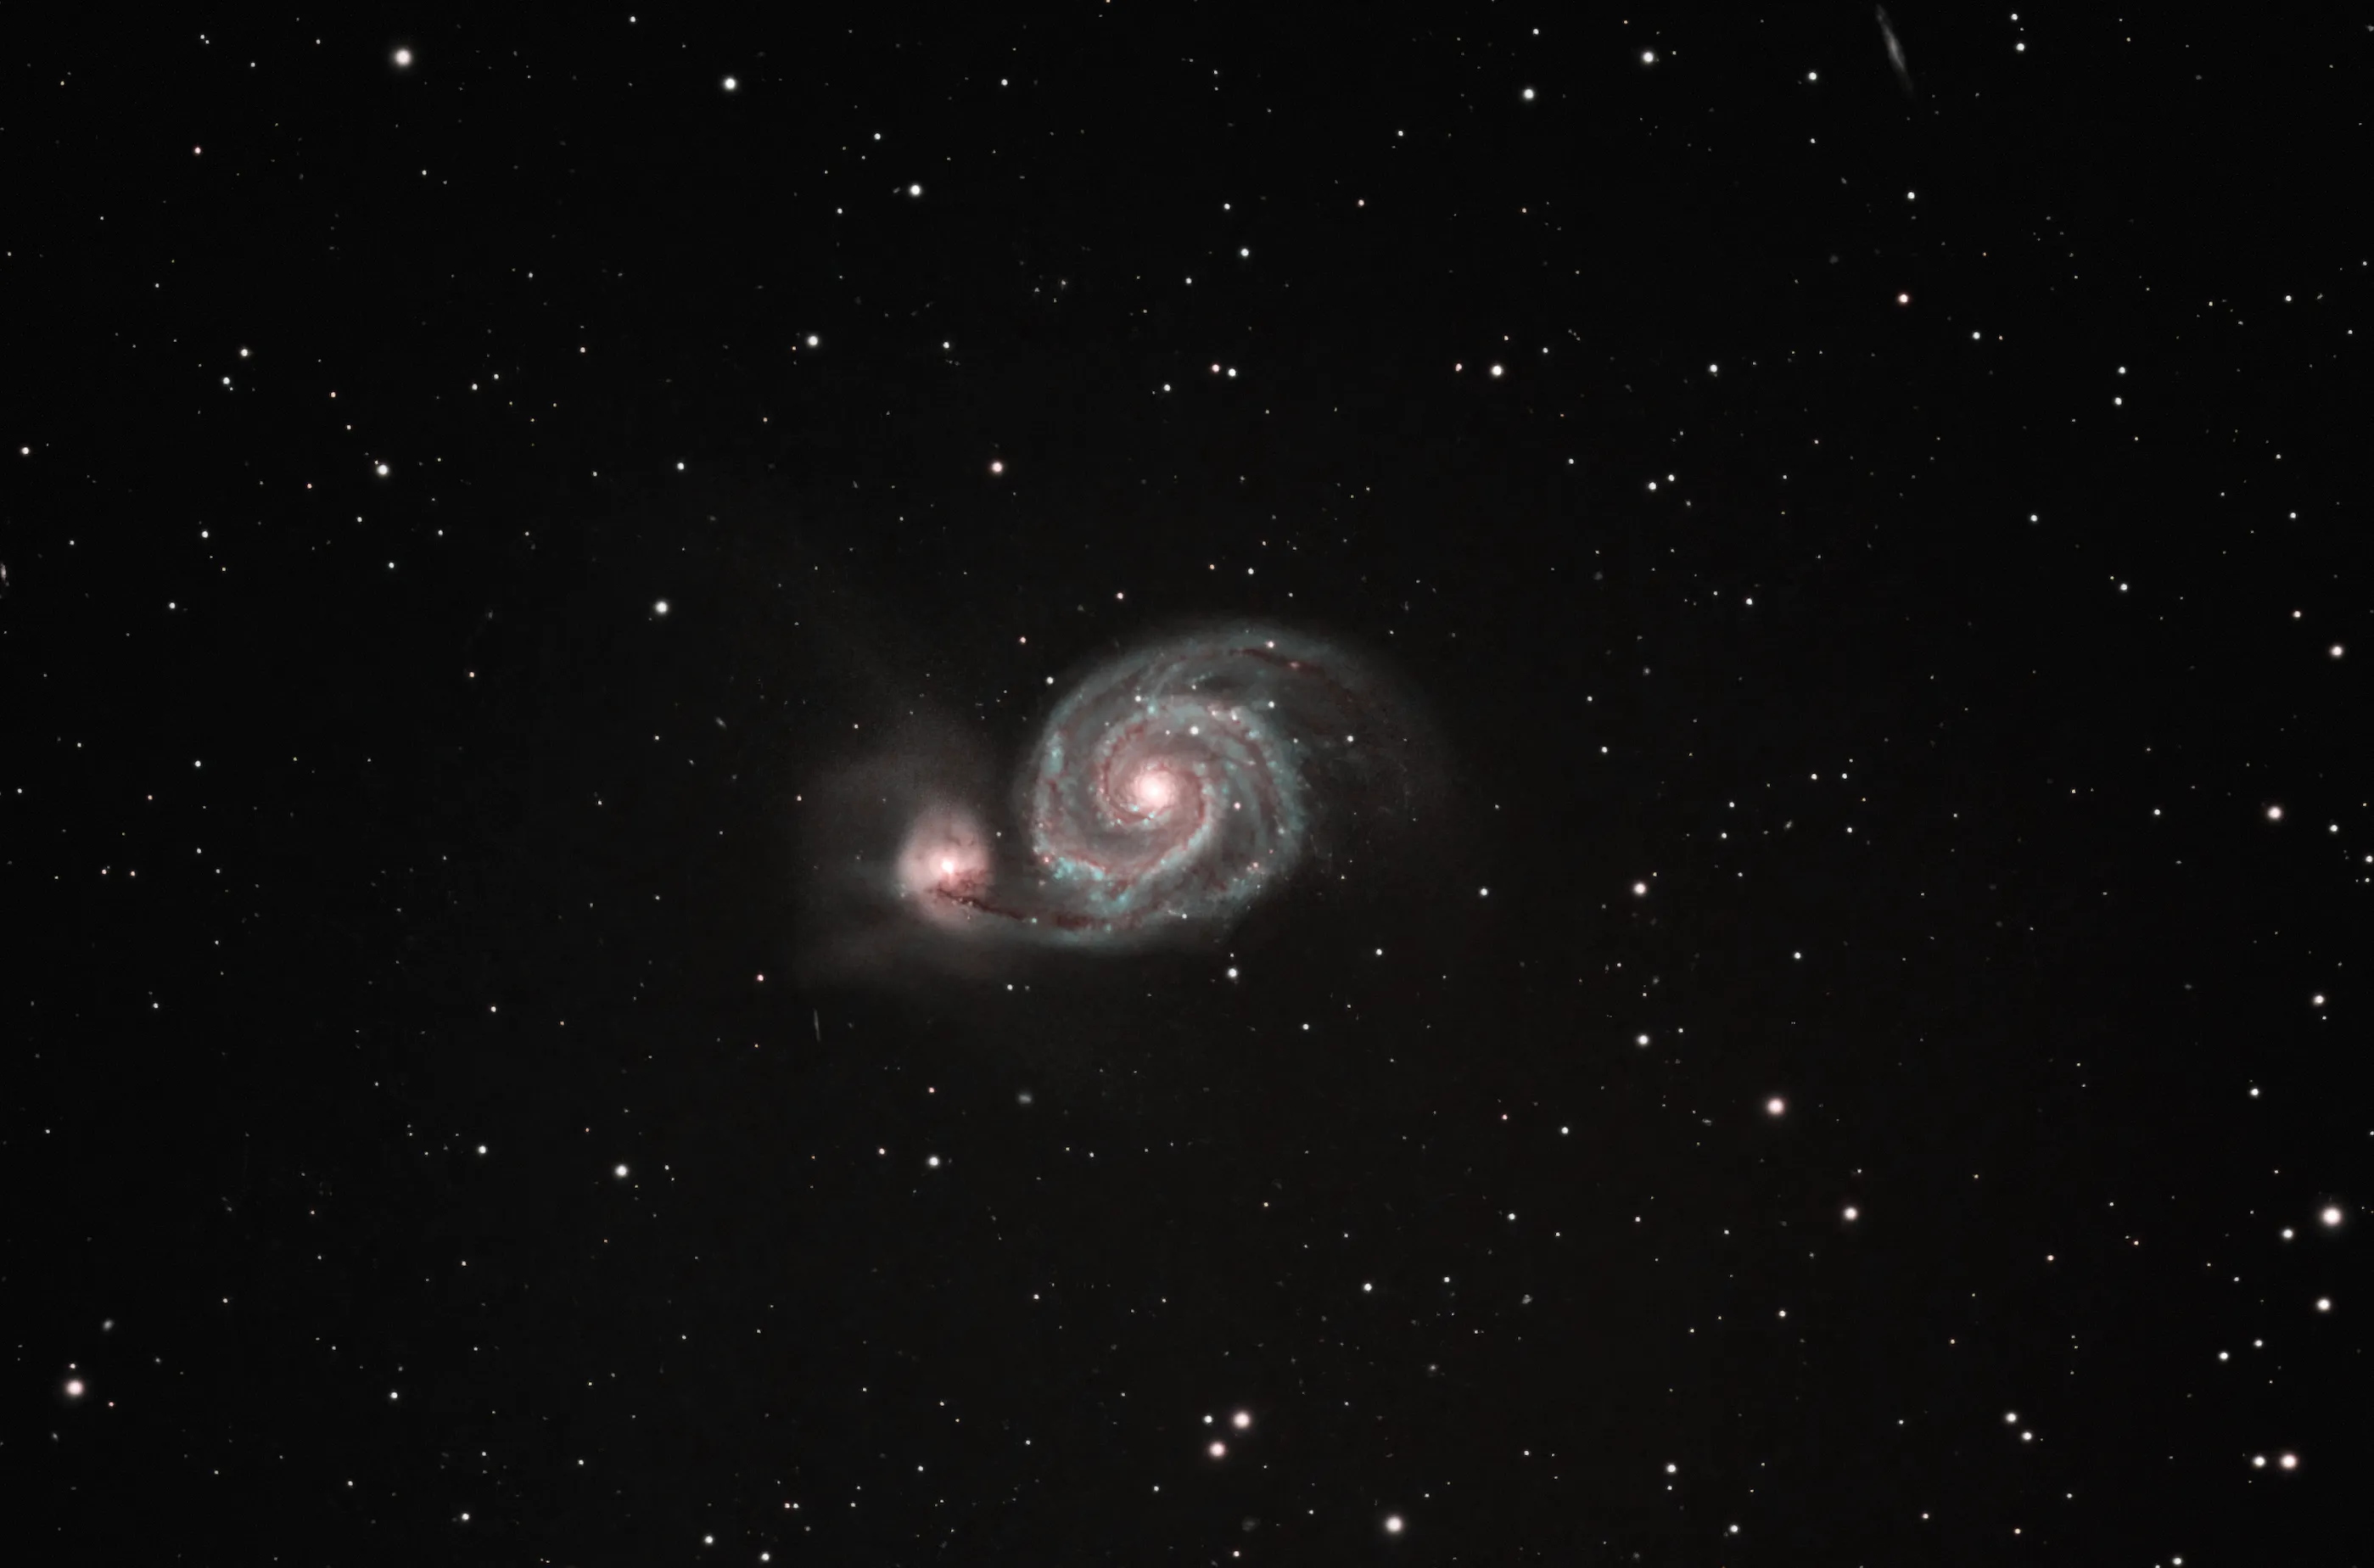 The Whirlpool Galaxy also known as Messier 51a or NGC 5194 photo taken with Explore Scientific FCD100 Series 127mm f7.5 Carbon Fiber Triplet ED APO 